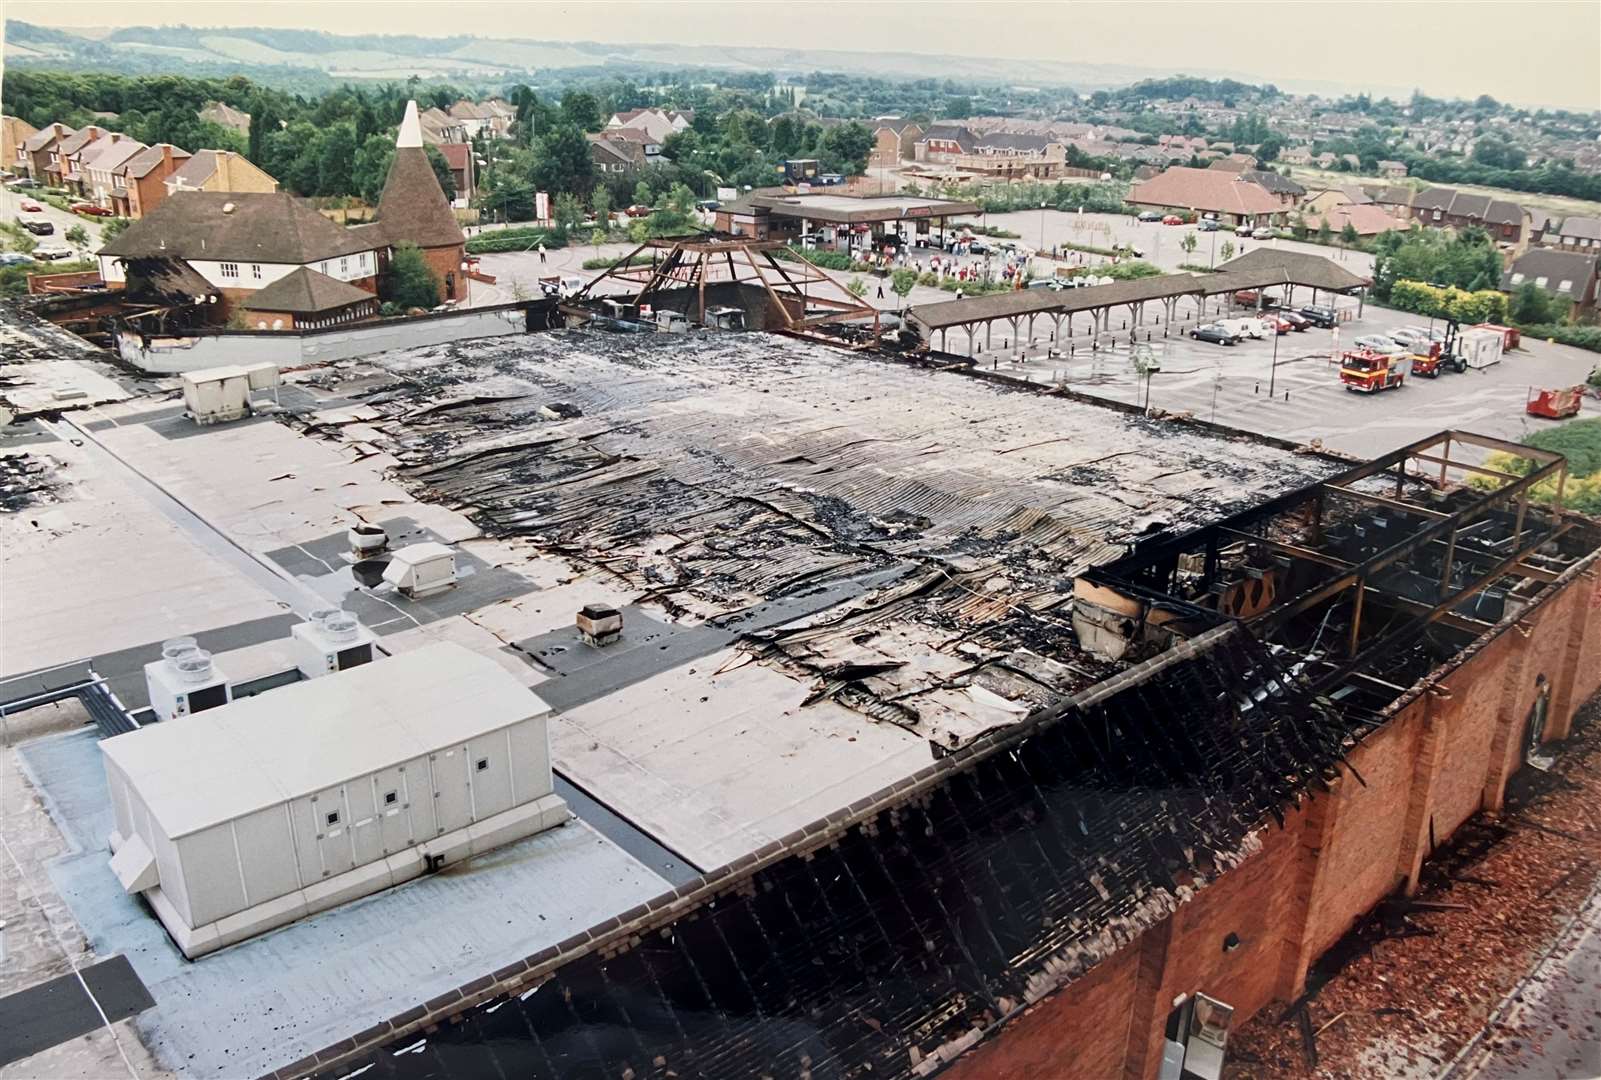 Tesco had to be demolished and rebuilt after the fire